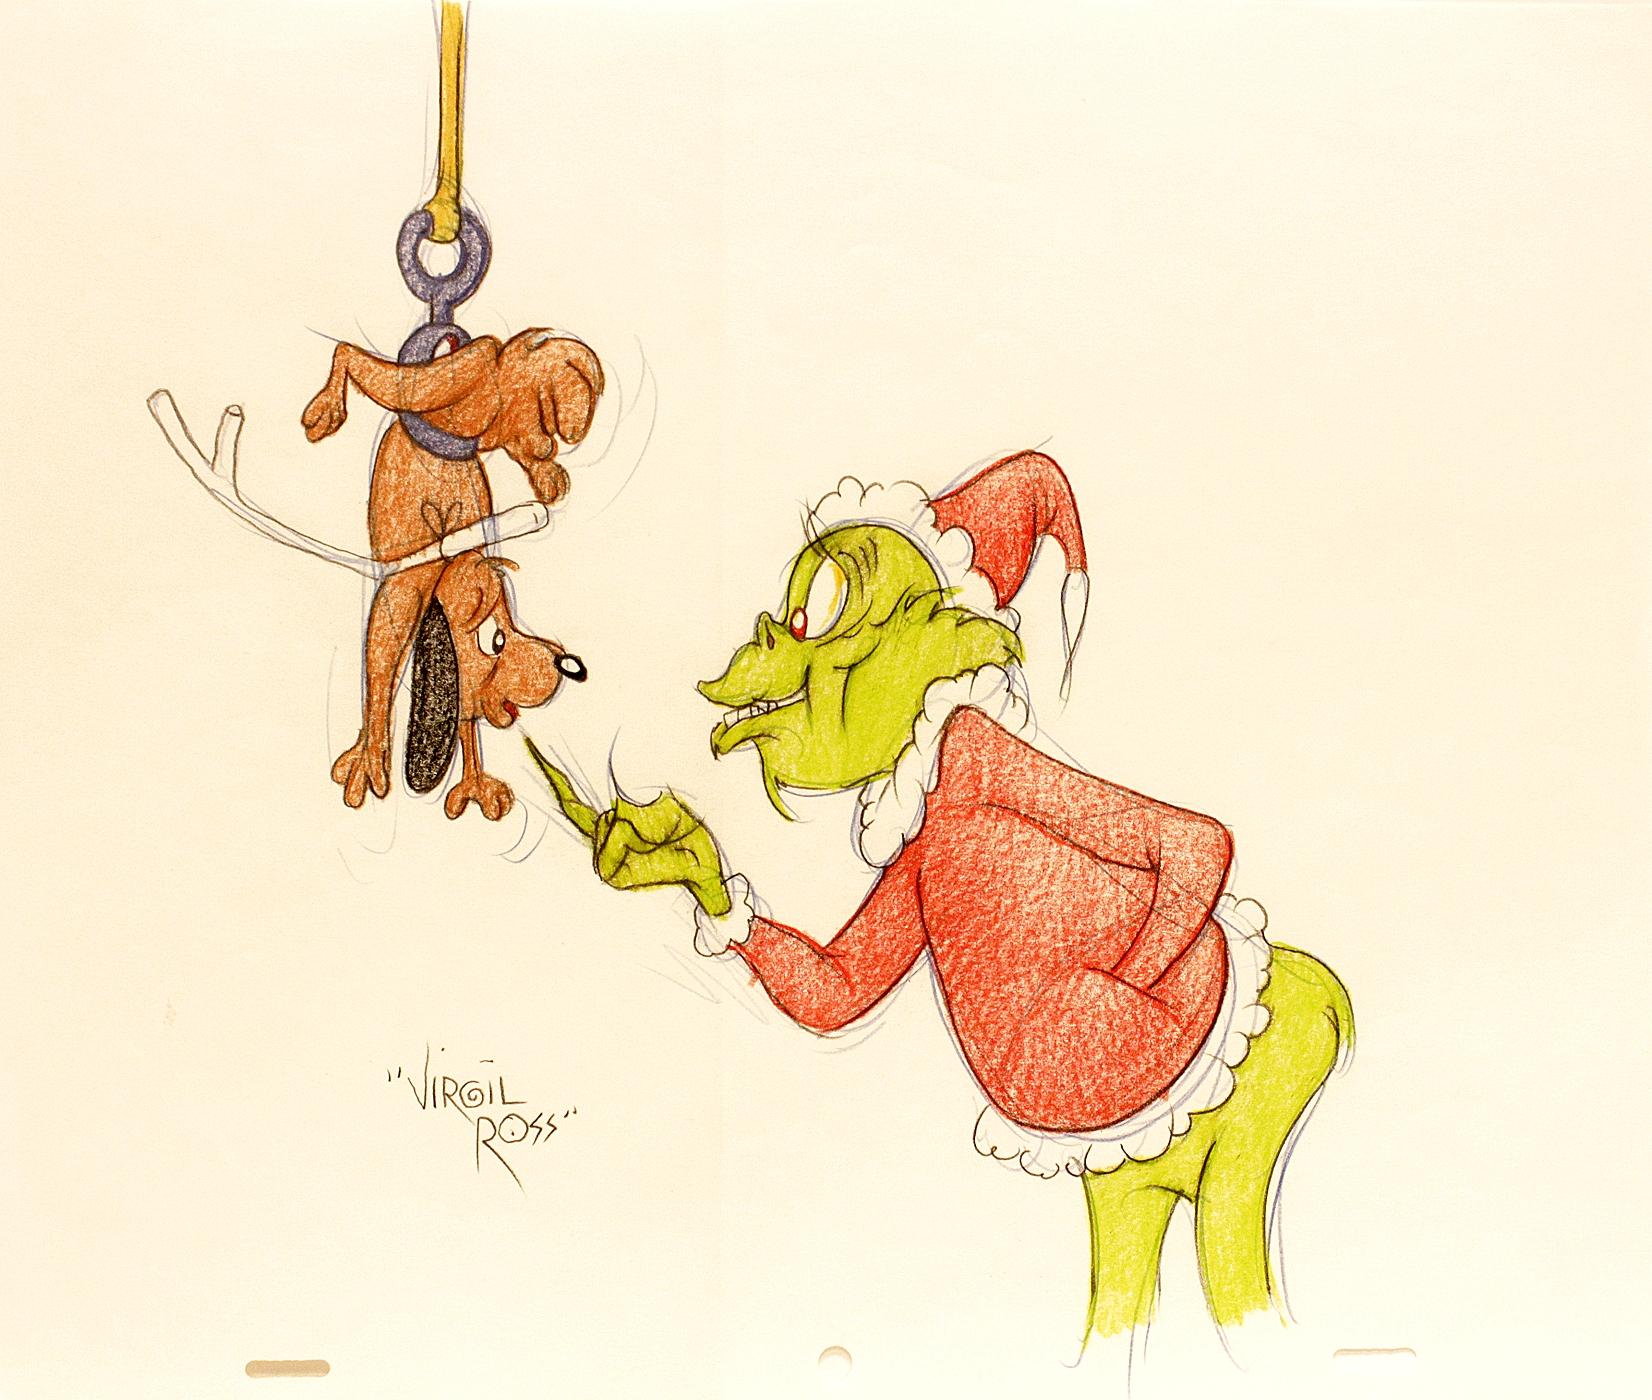 ARTIST: GEISEL, Theodore: (Dr. Seuss) ( Virgil Ross )

TITLE: The Grinch and Max. (Original drawing)

PUBLISHER: Warner Brothers Studios, (c.1990's)

DESCRIPTION: ORIGINAL DRAWING OF THE GRINCH AND MAX. image 10-3/8